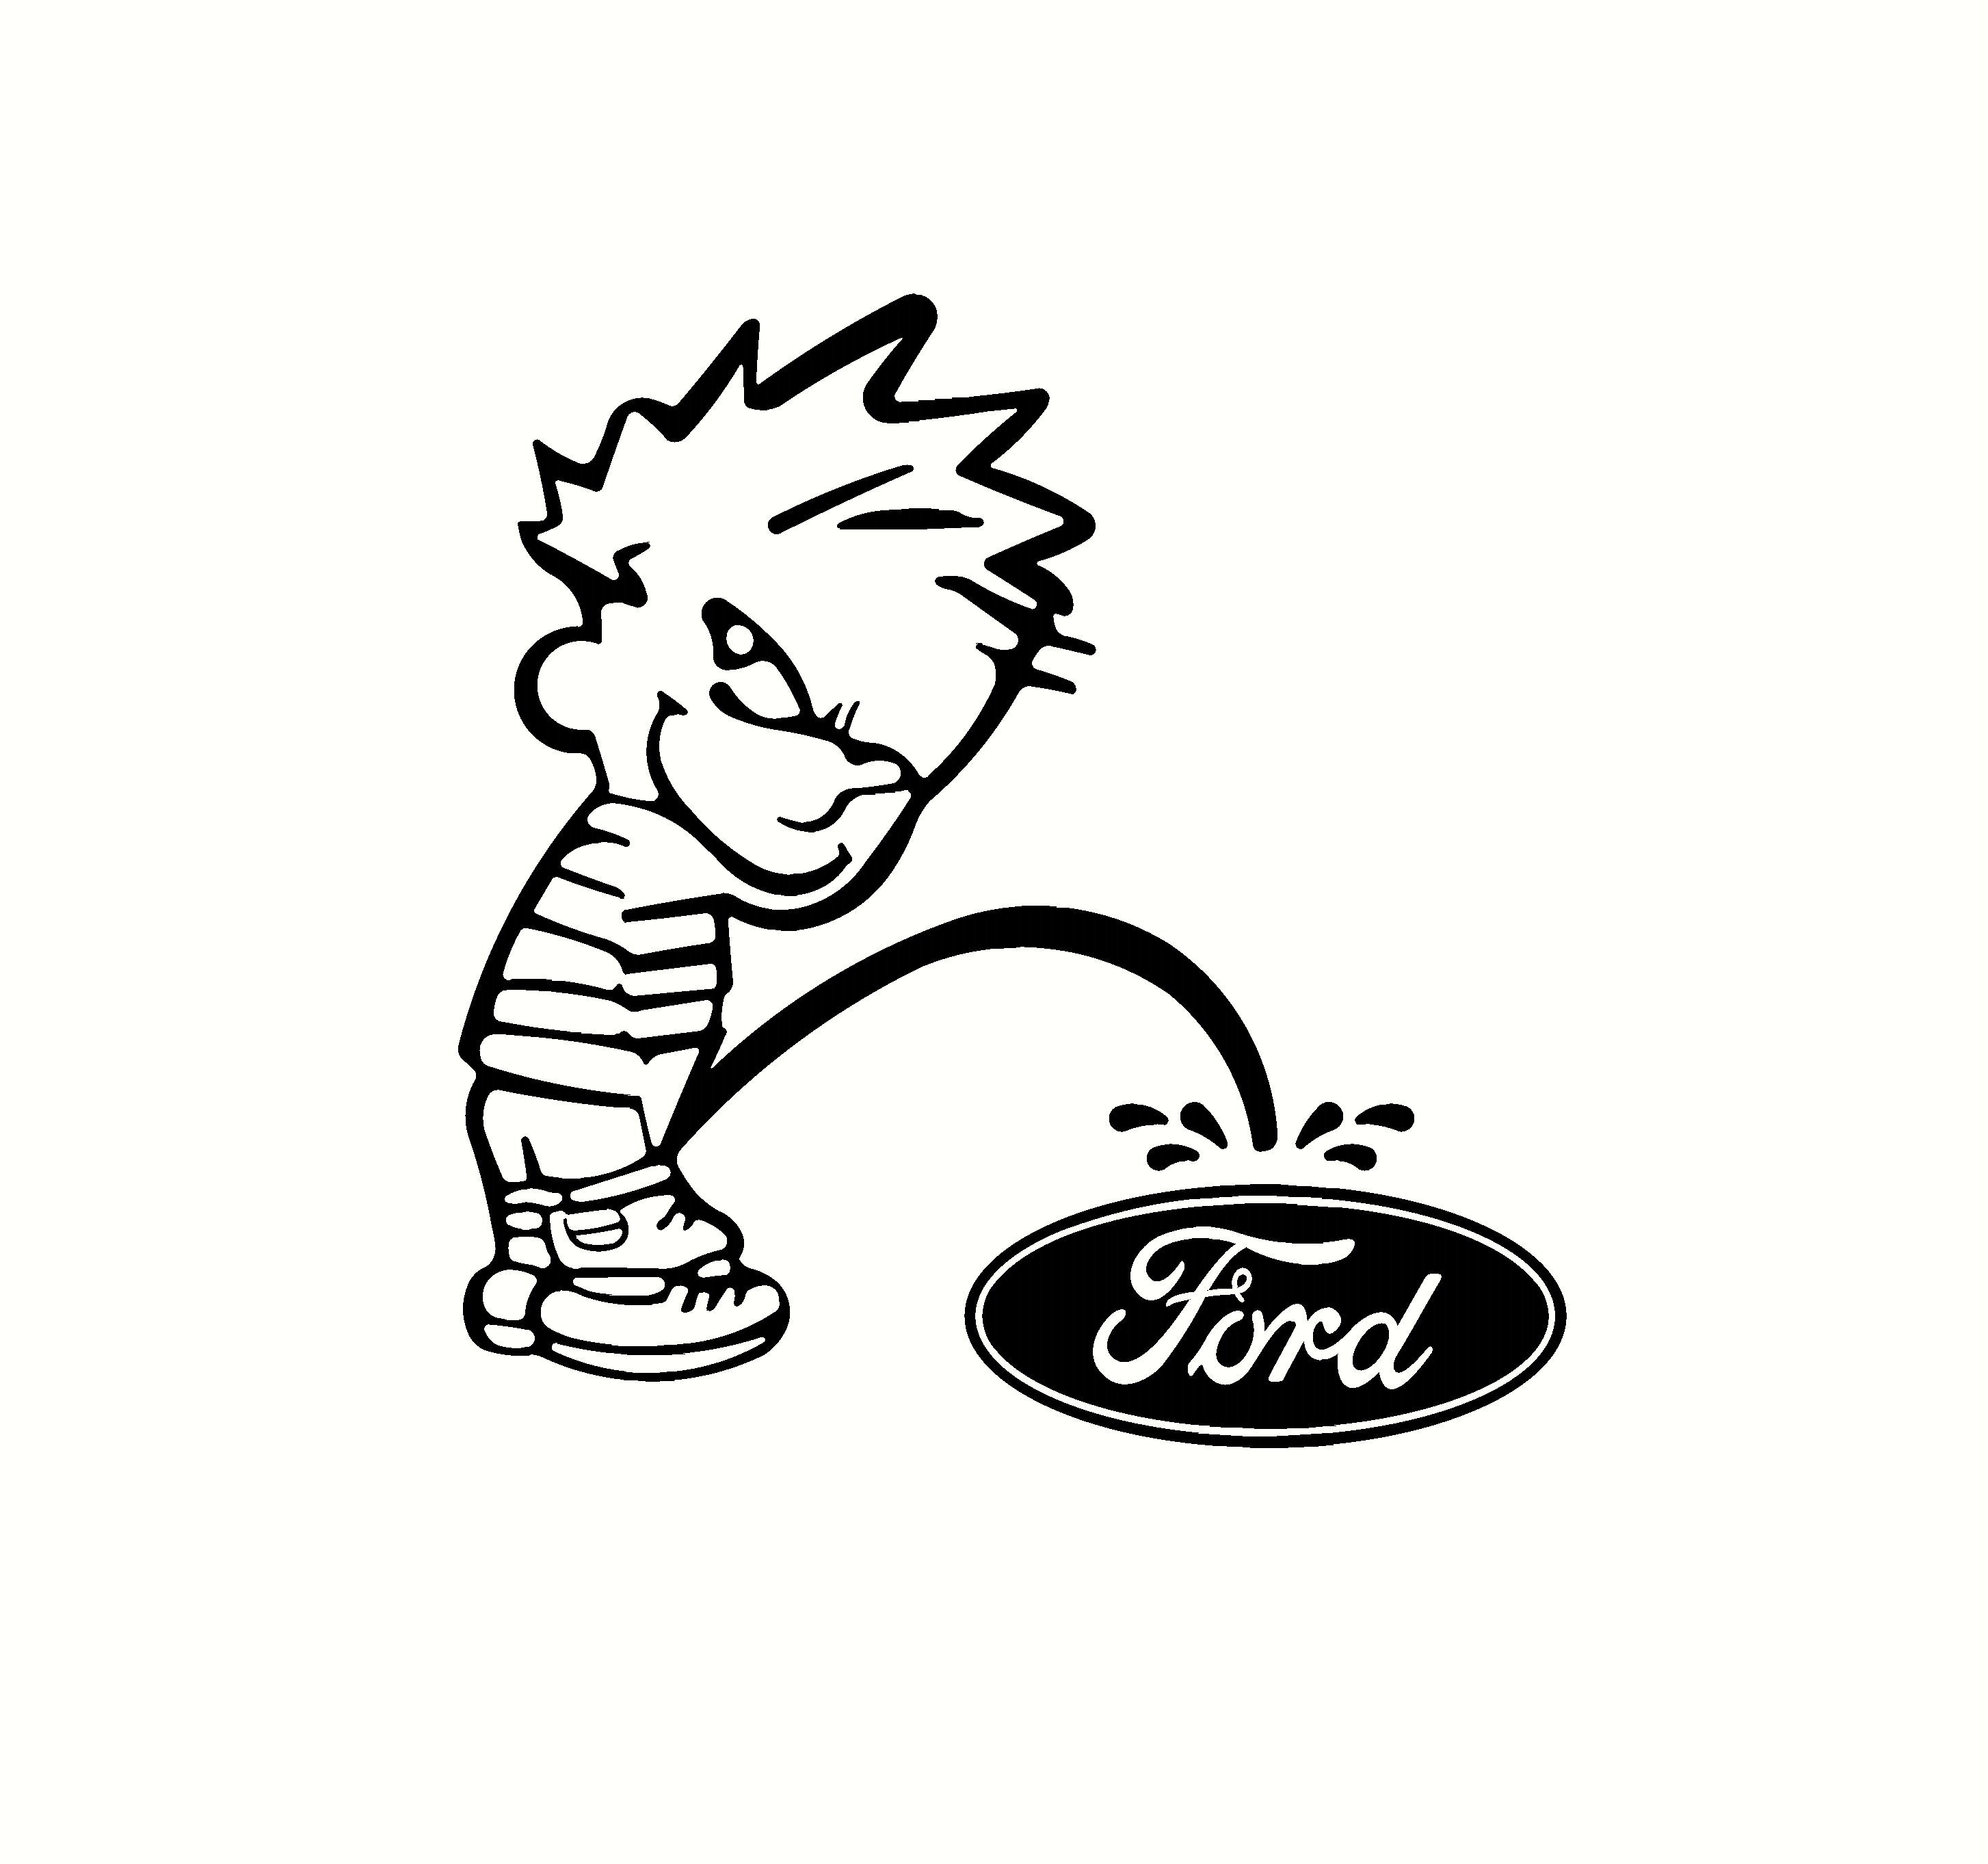 Calvin Little Guy Pee on Ford Decal Sticker Auto Laptop